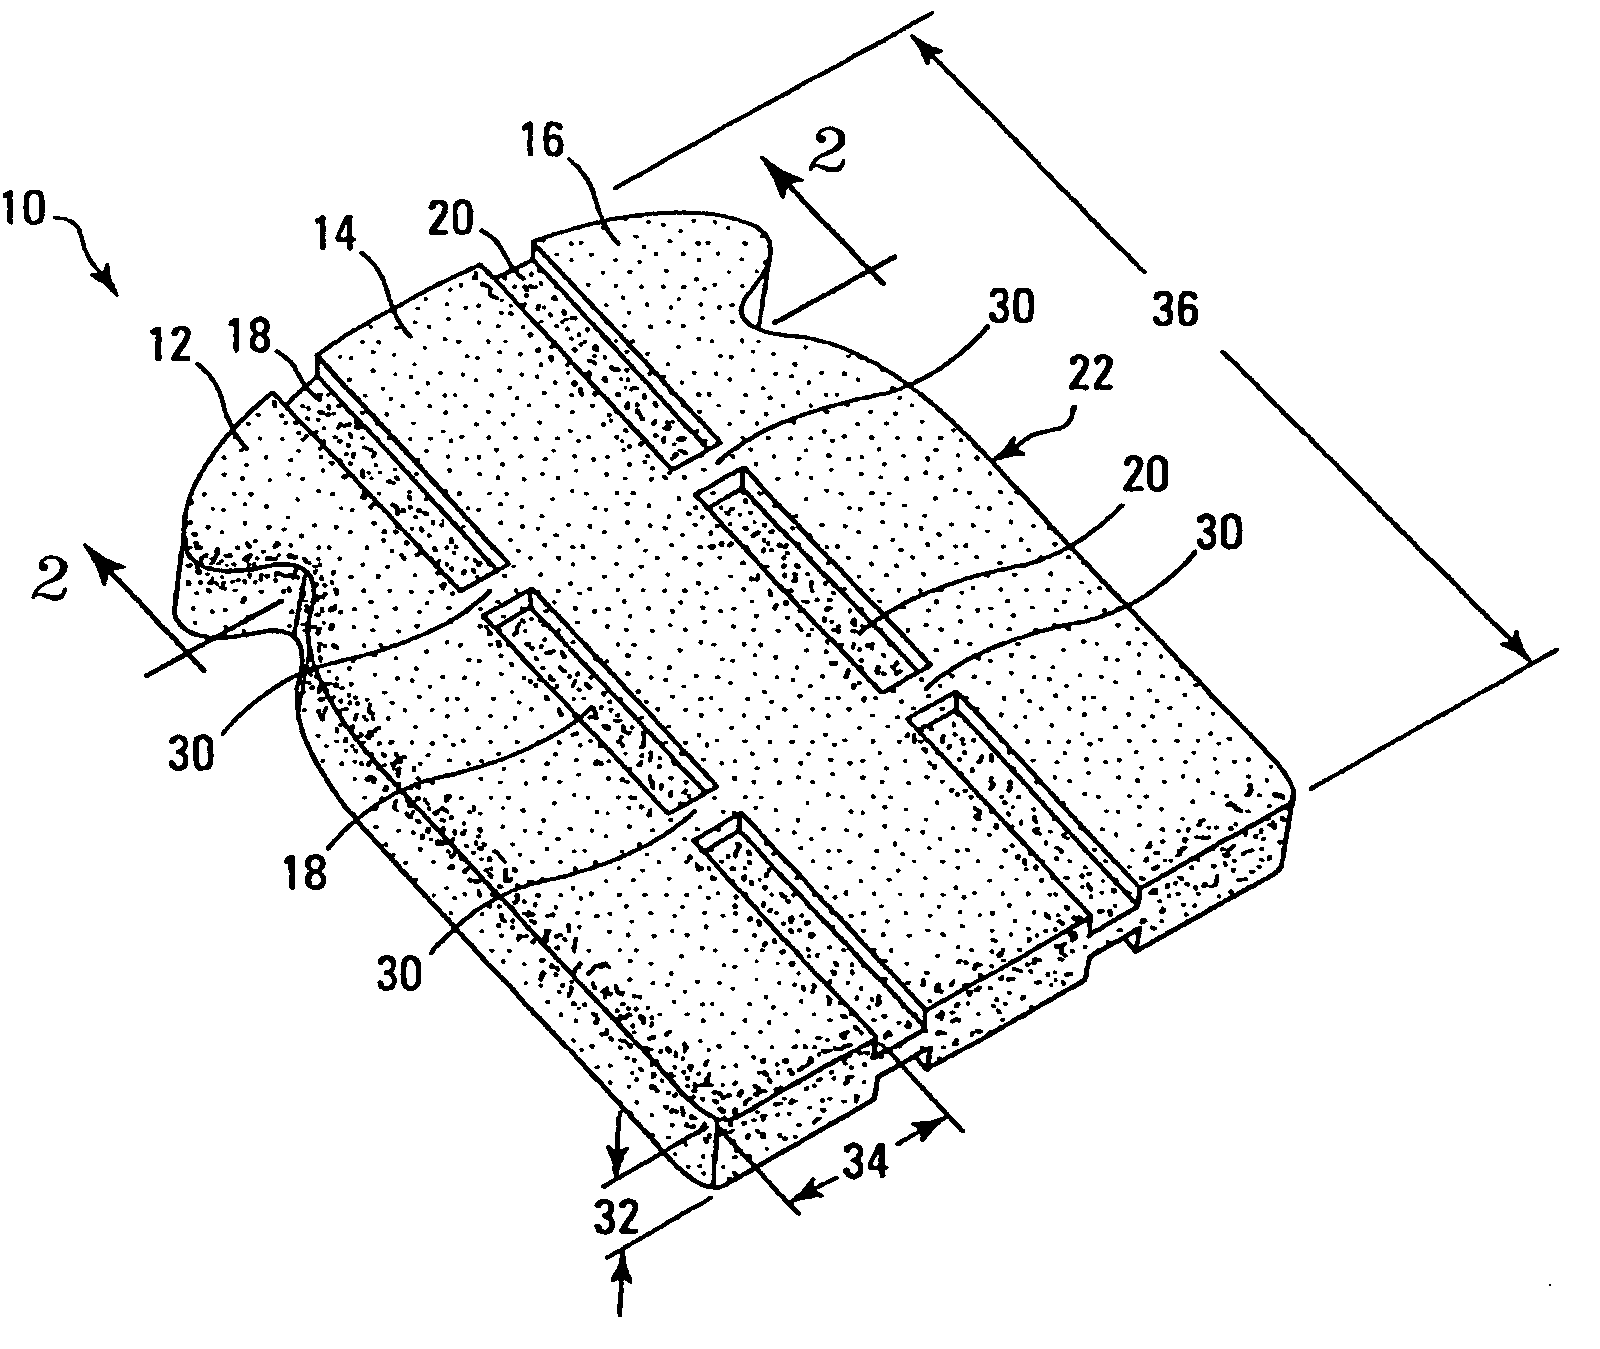 Reheatable batter product having structure to facilitate separation